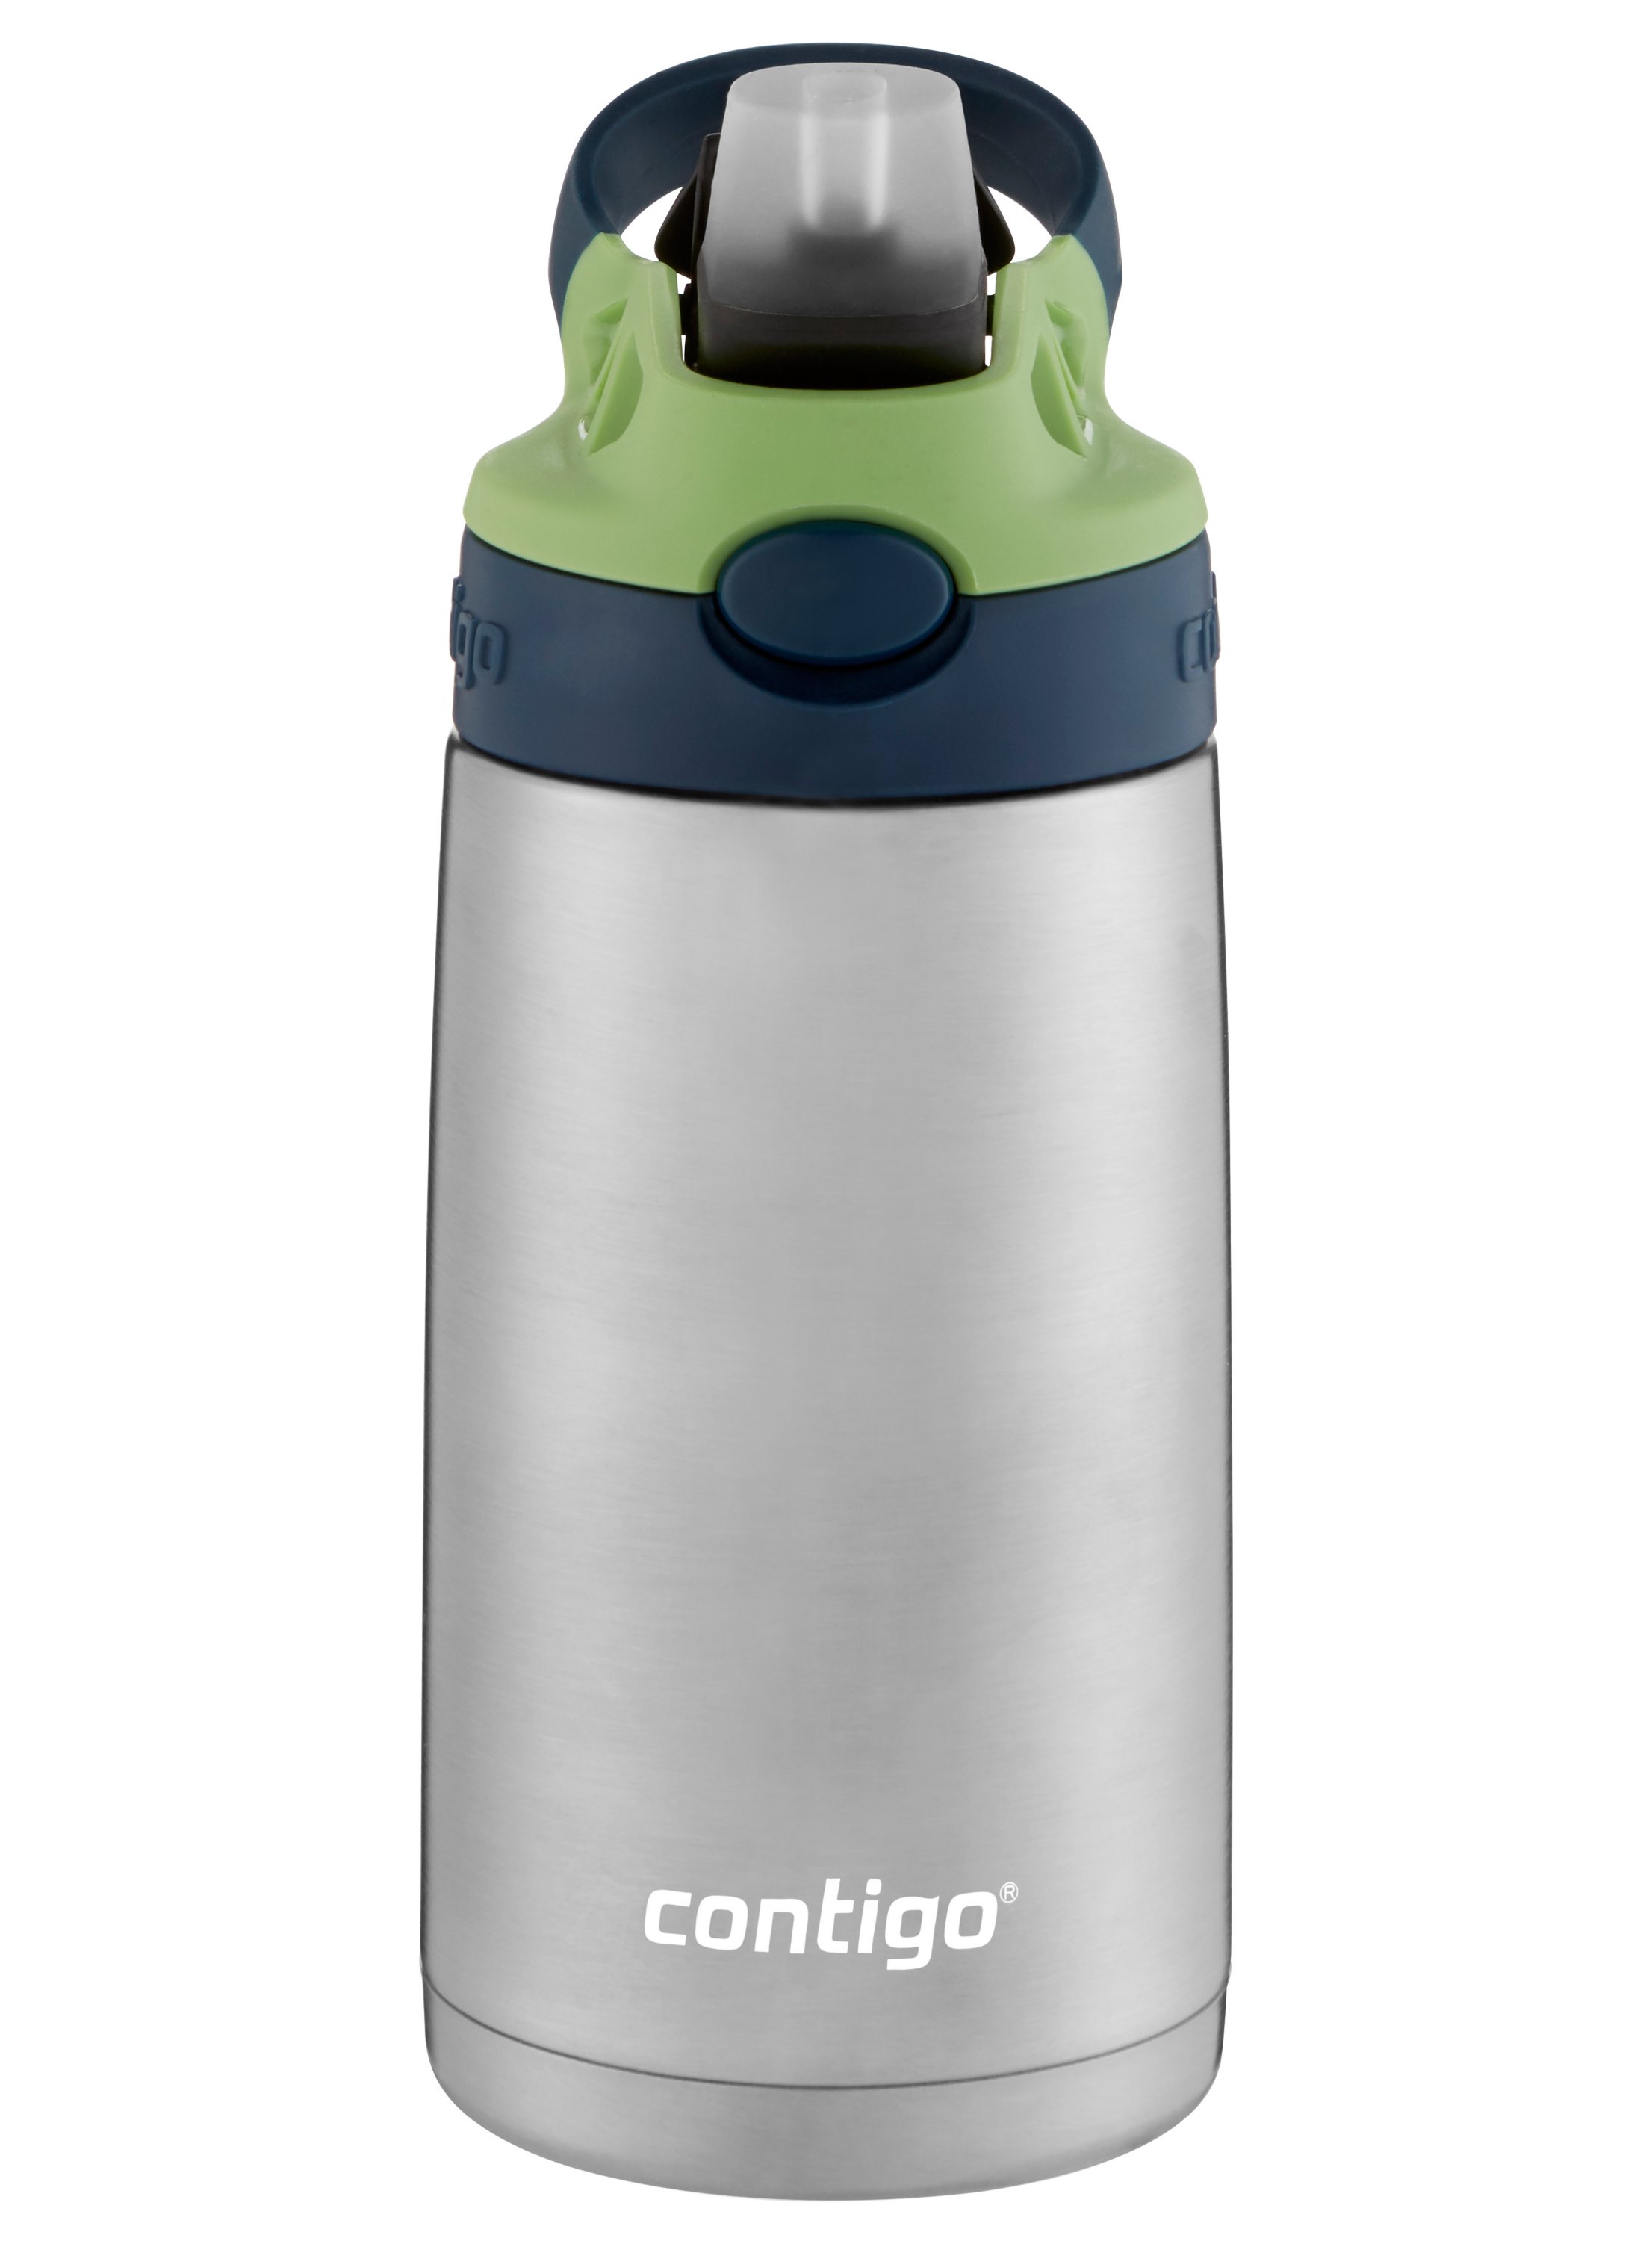 Stainless Contigo Kids Spill Proof Autospout BPA Free Water Bottles Two Pack NEW 